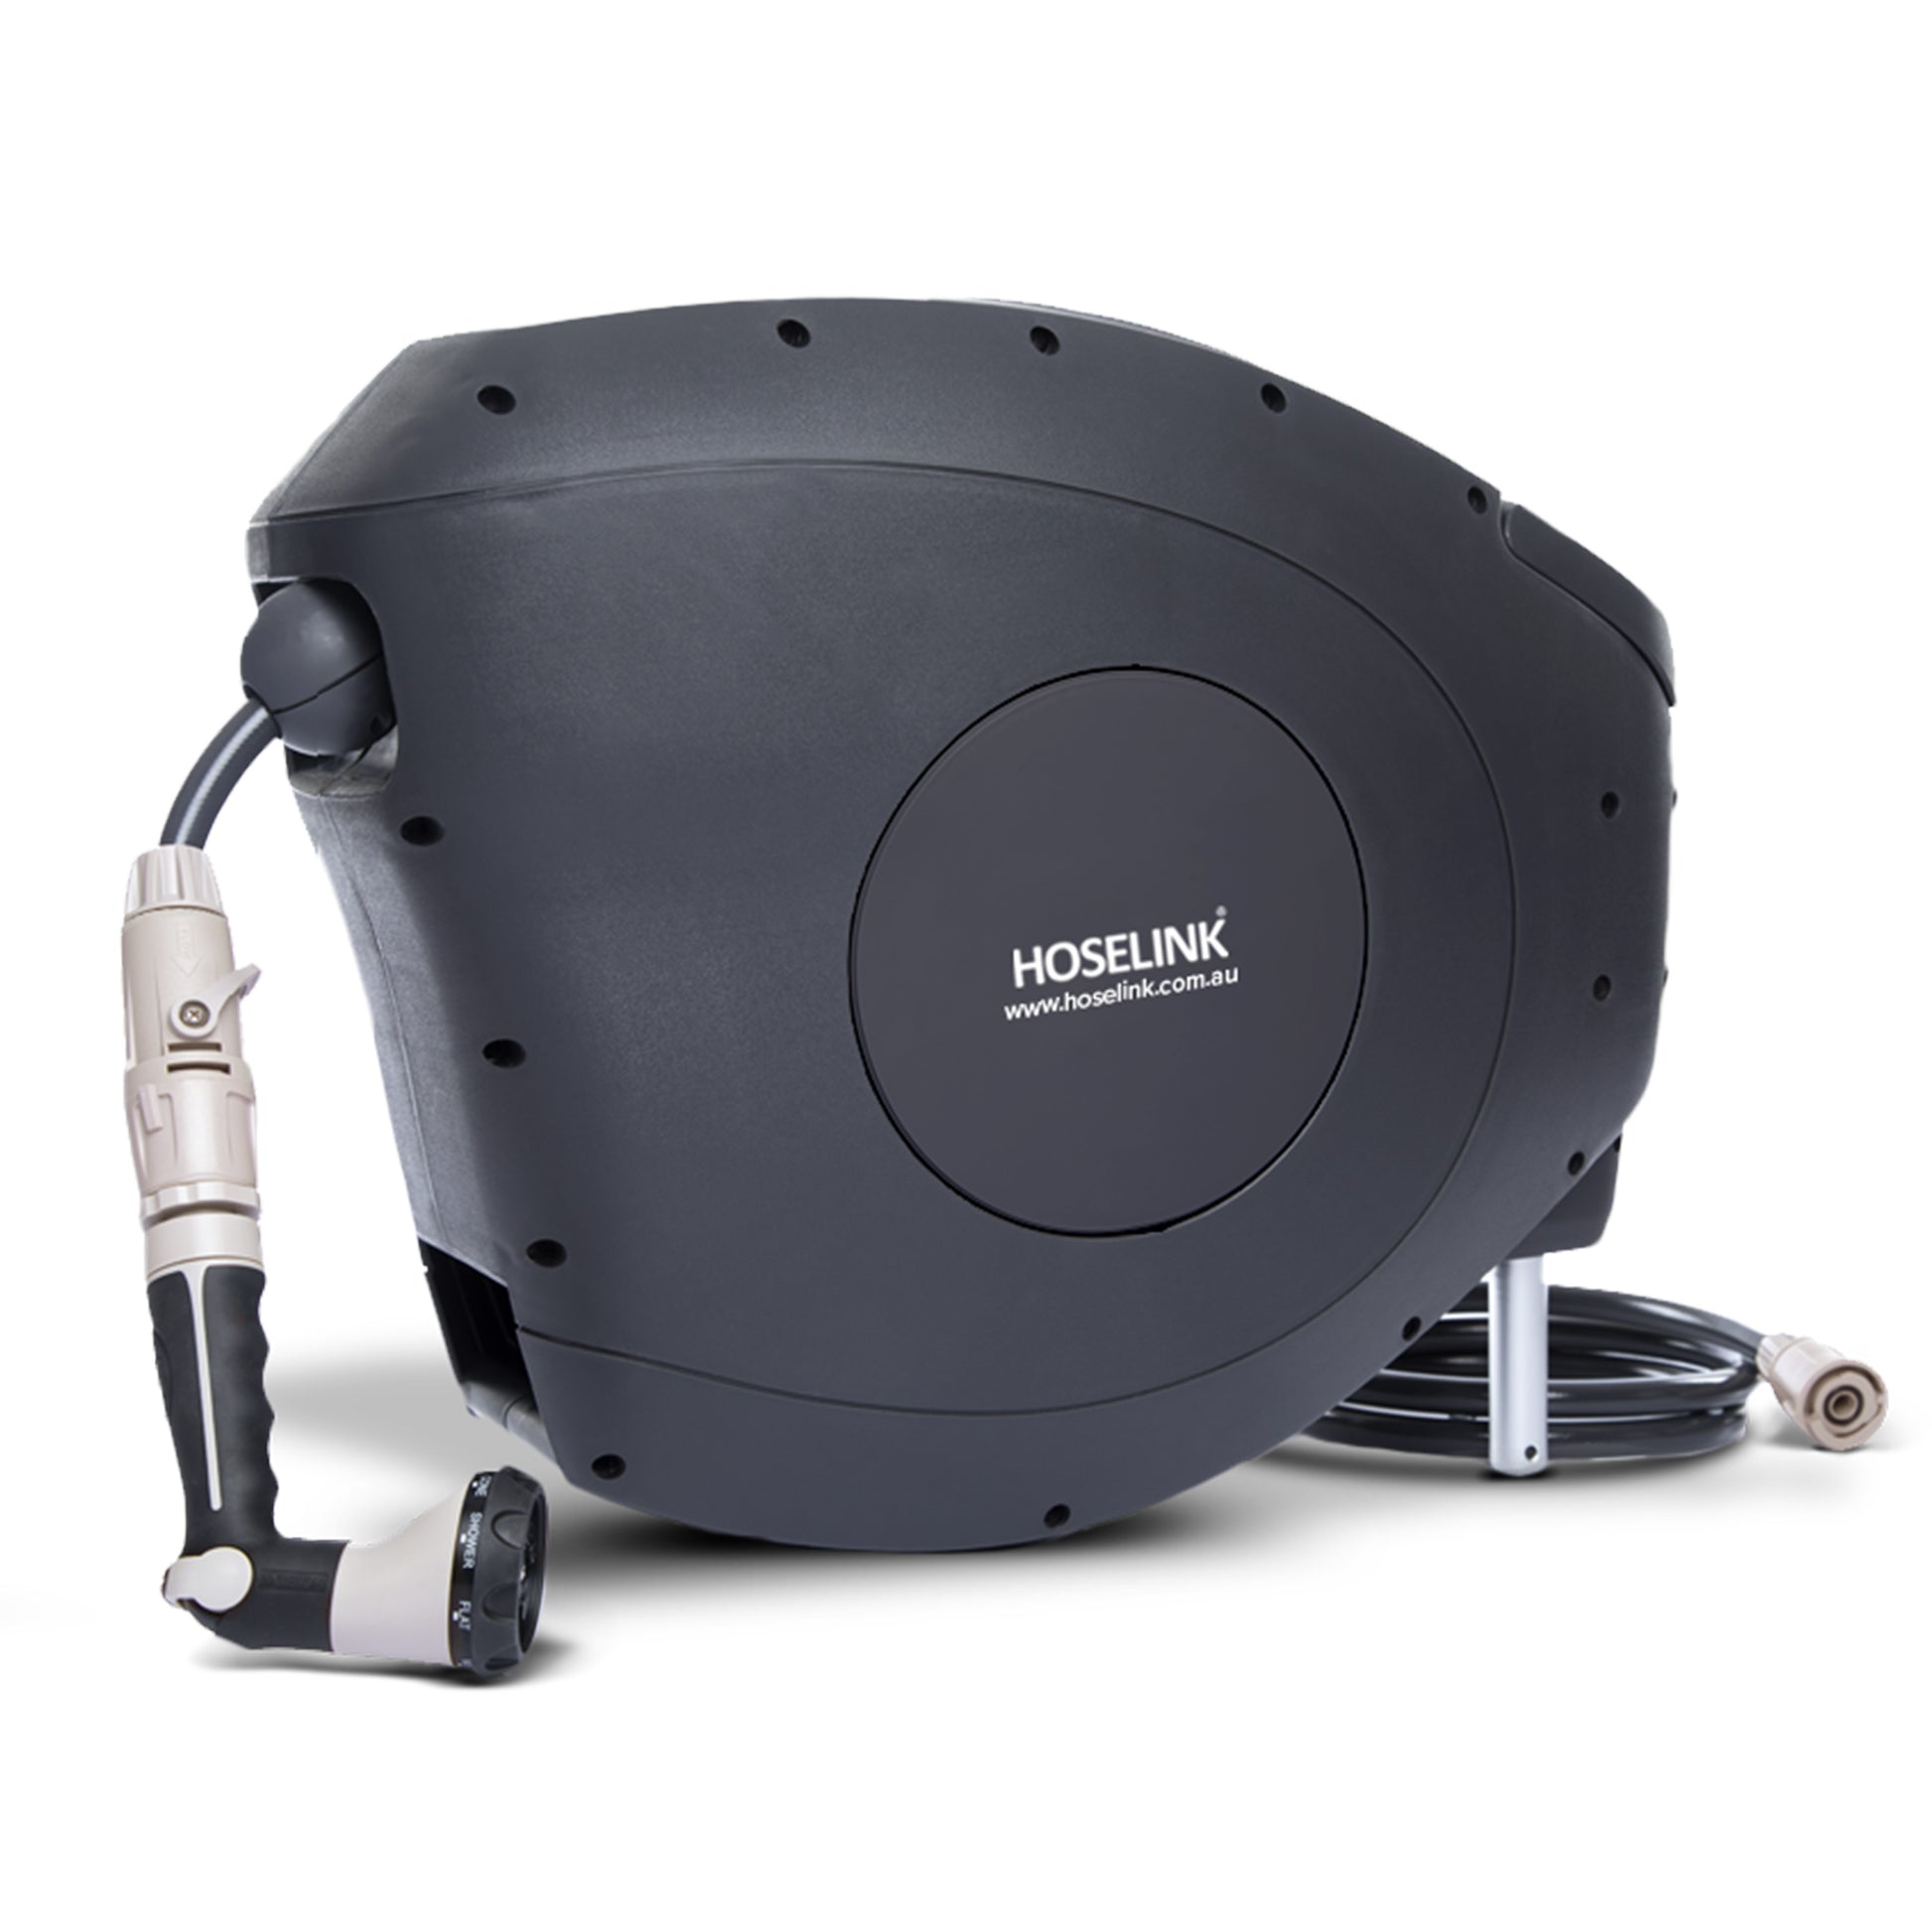 Product review: Hoselink retractable hose reel